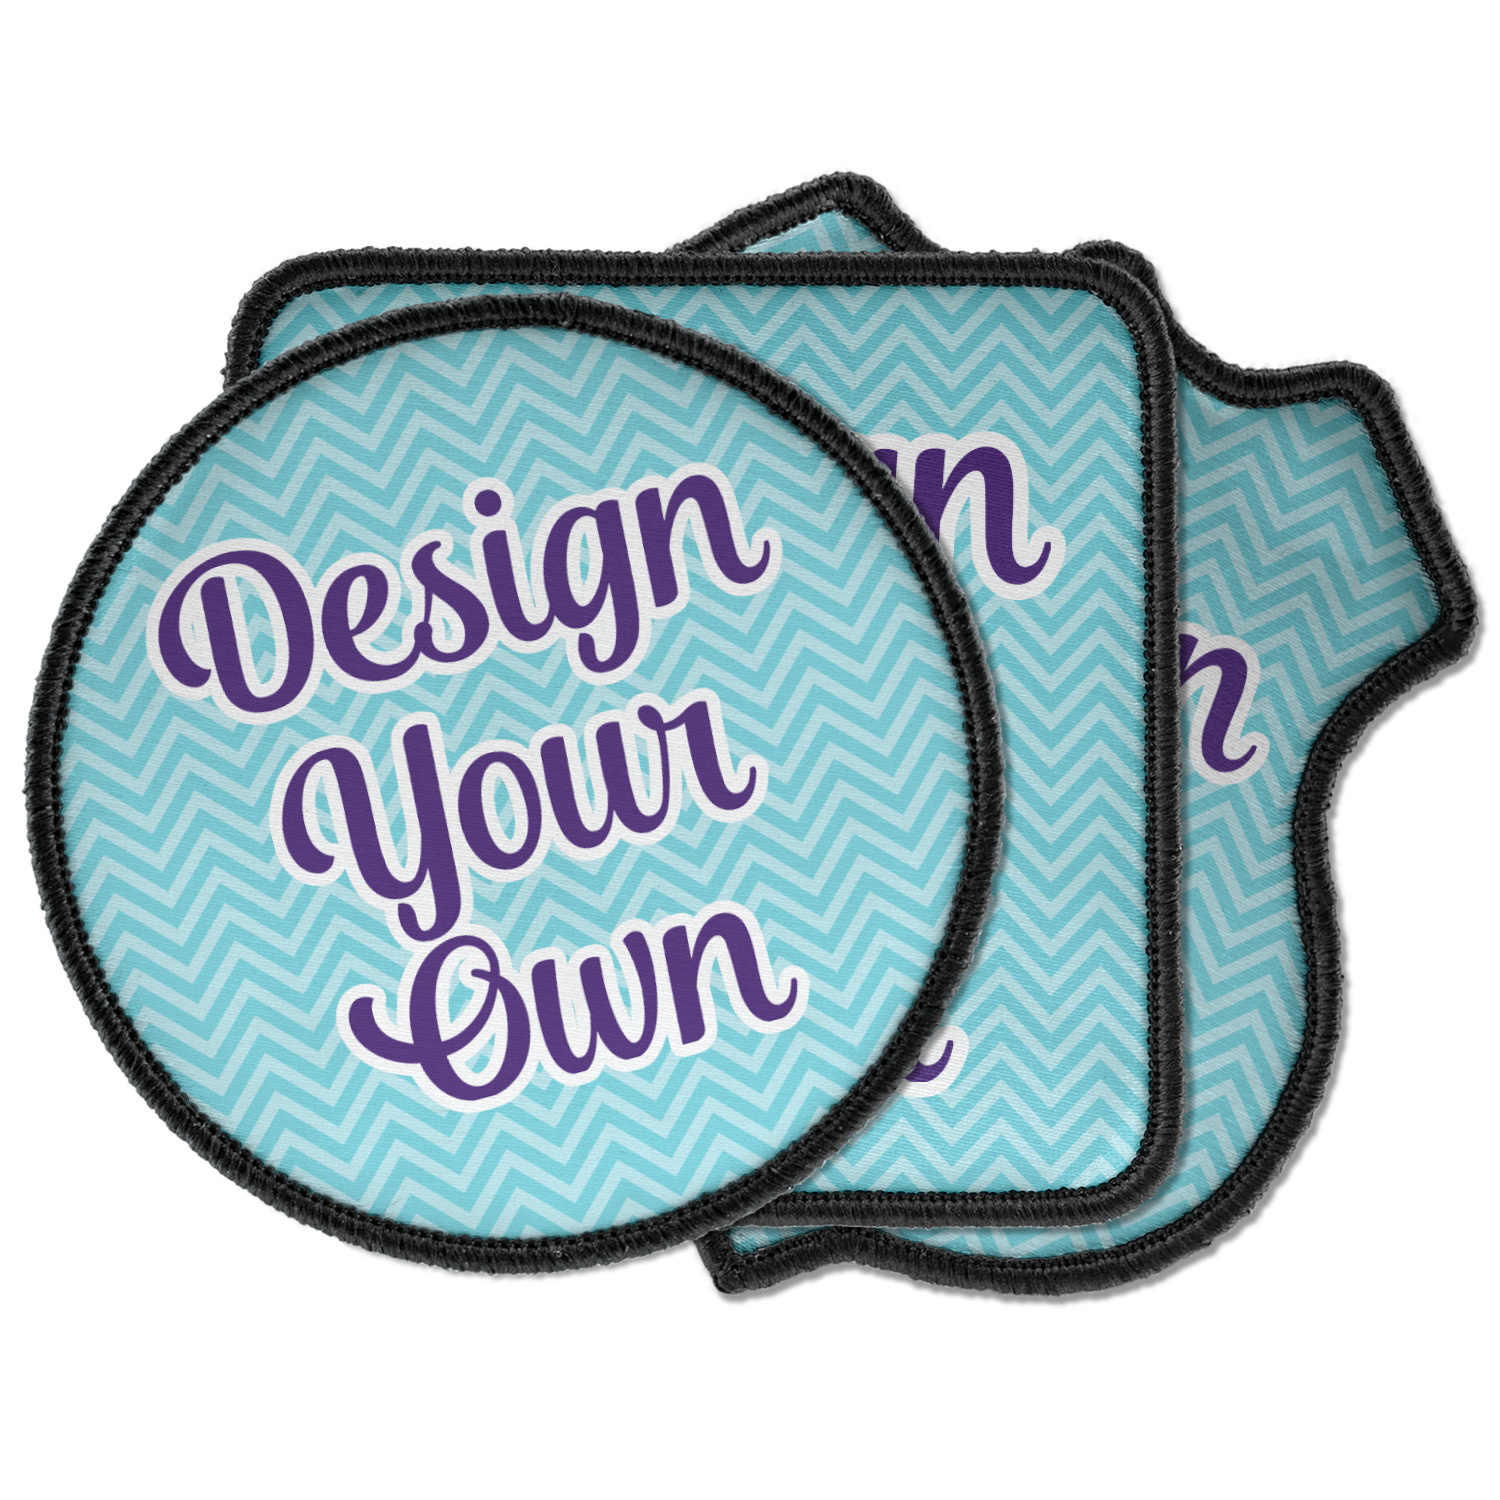 CUSTOM FULLY EMBROIDERED IRON ON PATCH PERSONALIZED DESIGN 